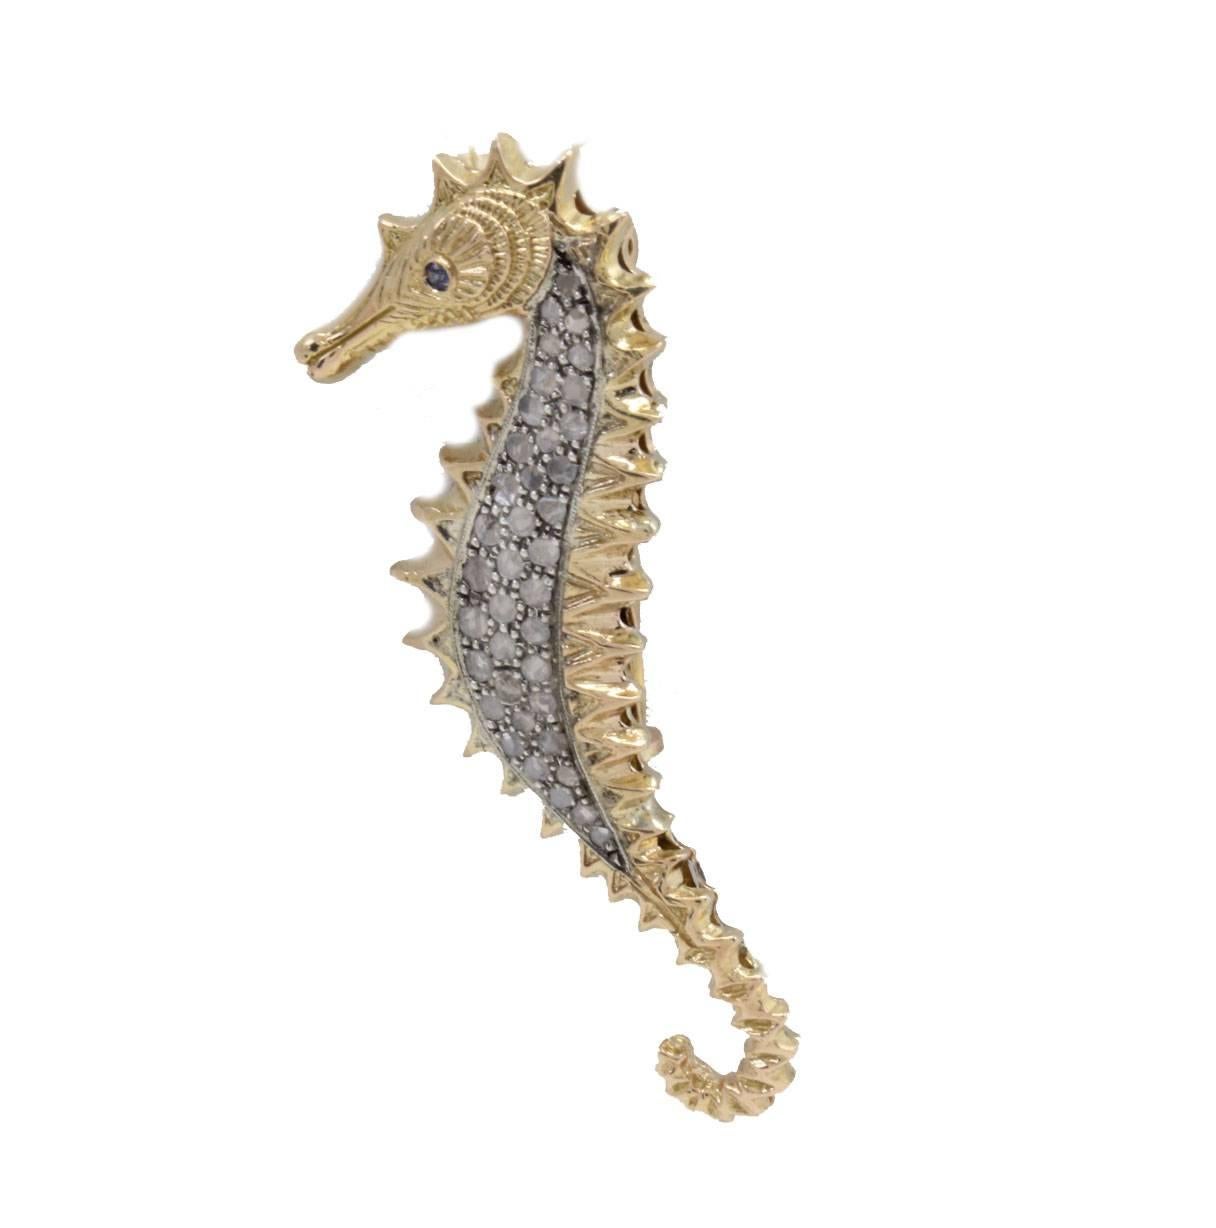 Graceful  brooch and pendant sea horse shaped created in 14Kt yellow gold and silver, embellished of diamonds and as eye a little blue sapphire.

Diamonds 1.07 Kt
Blue sapphire 0.04 Kt
Tot weight 12.1 gr
Rf. gihc 